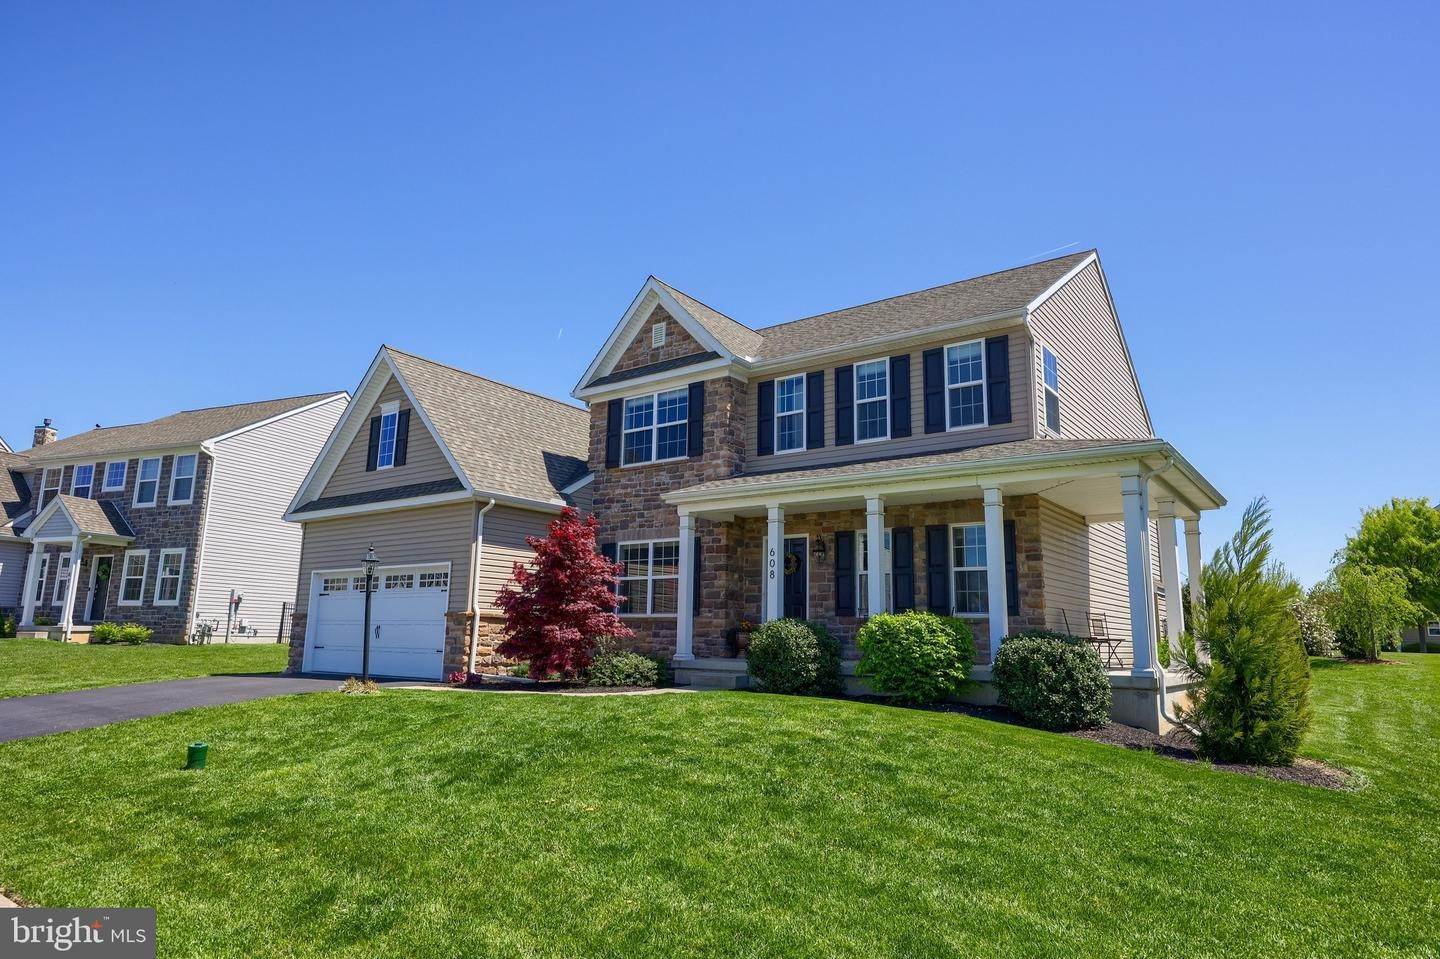 2. Residential for Sale at 608 WARMINSTER Lane Lititz, Pennsylvania 17543 United States